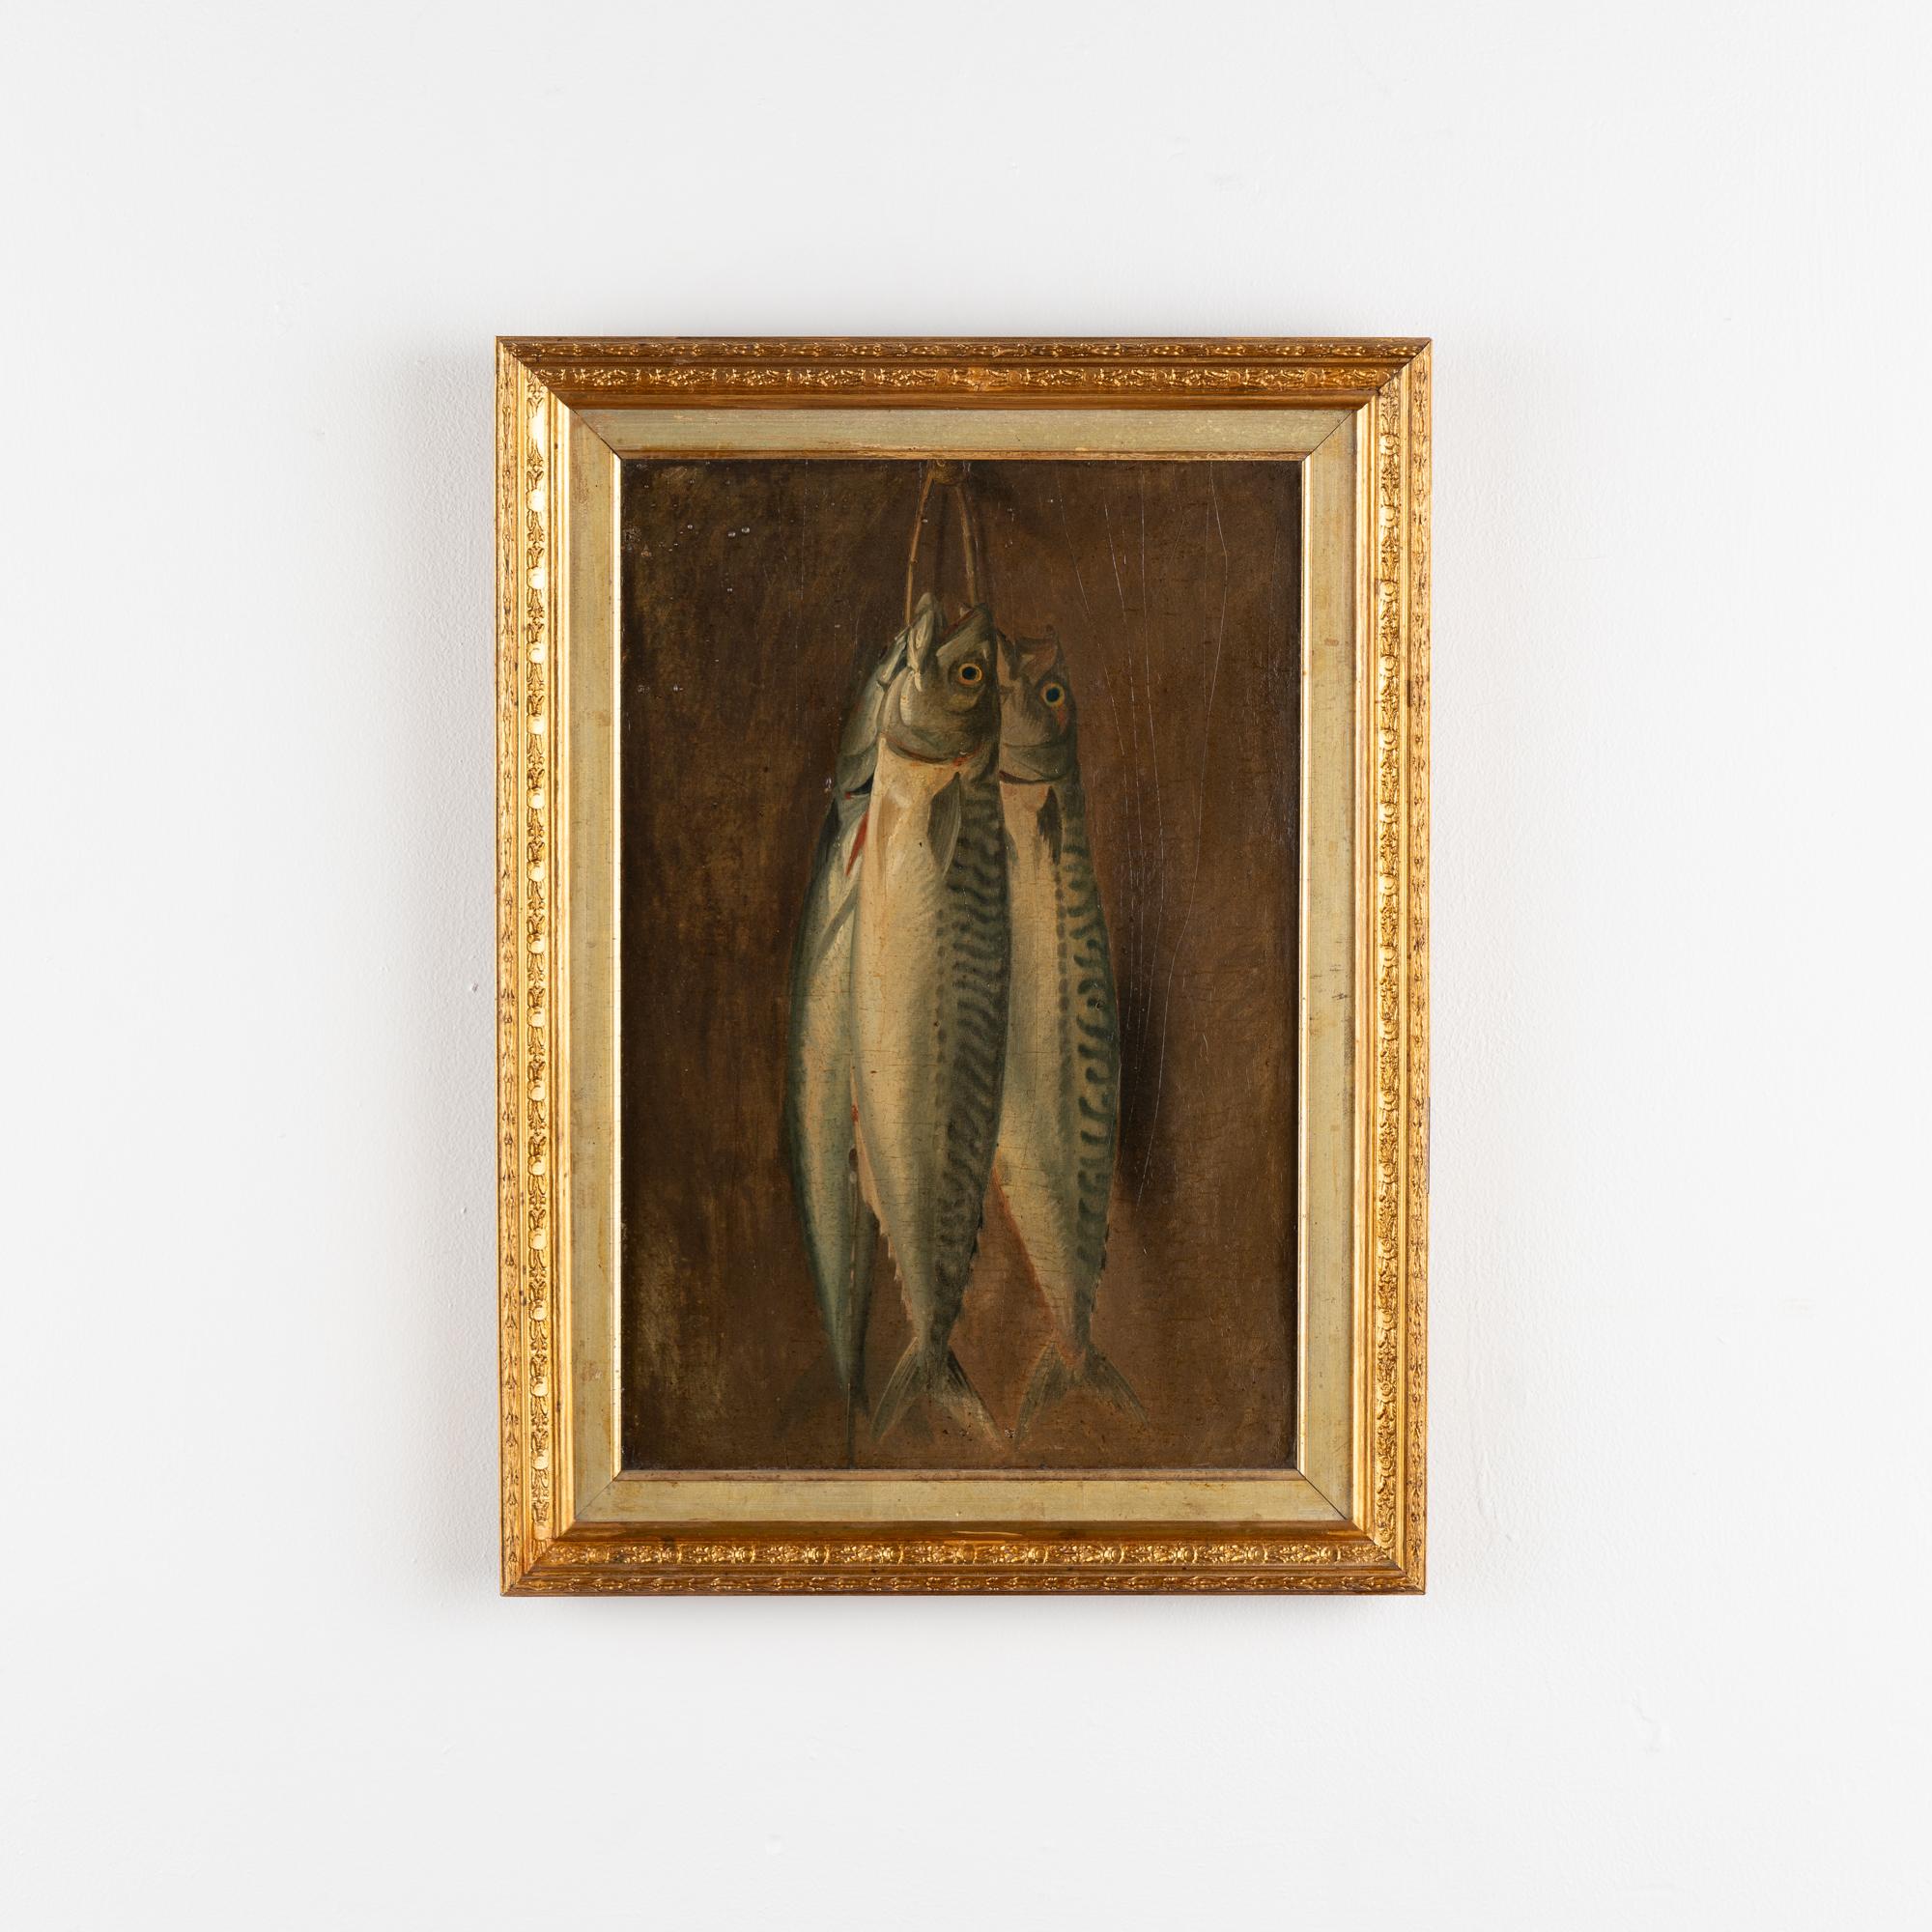 Original oil on board painting of still life with three fish.
Aged condition includes craquelure throughout, old repairs, small bubbles, nicks/scratches, etc. Board is solid, in tact. Gold gilt frame is in similar typical used condition for age.